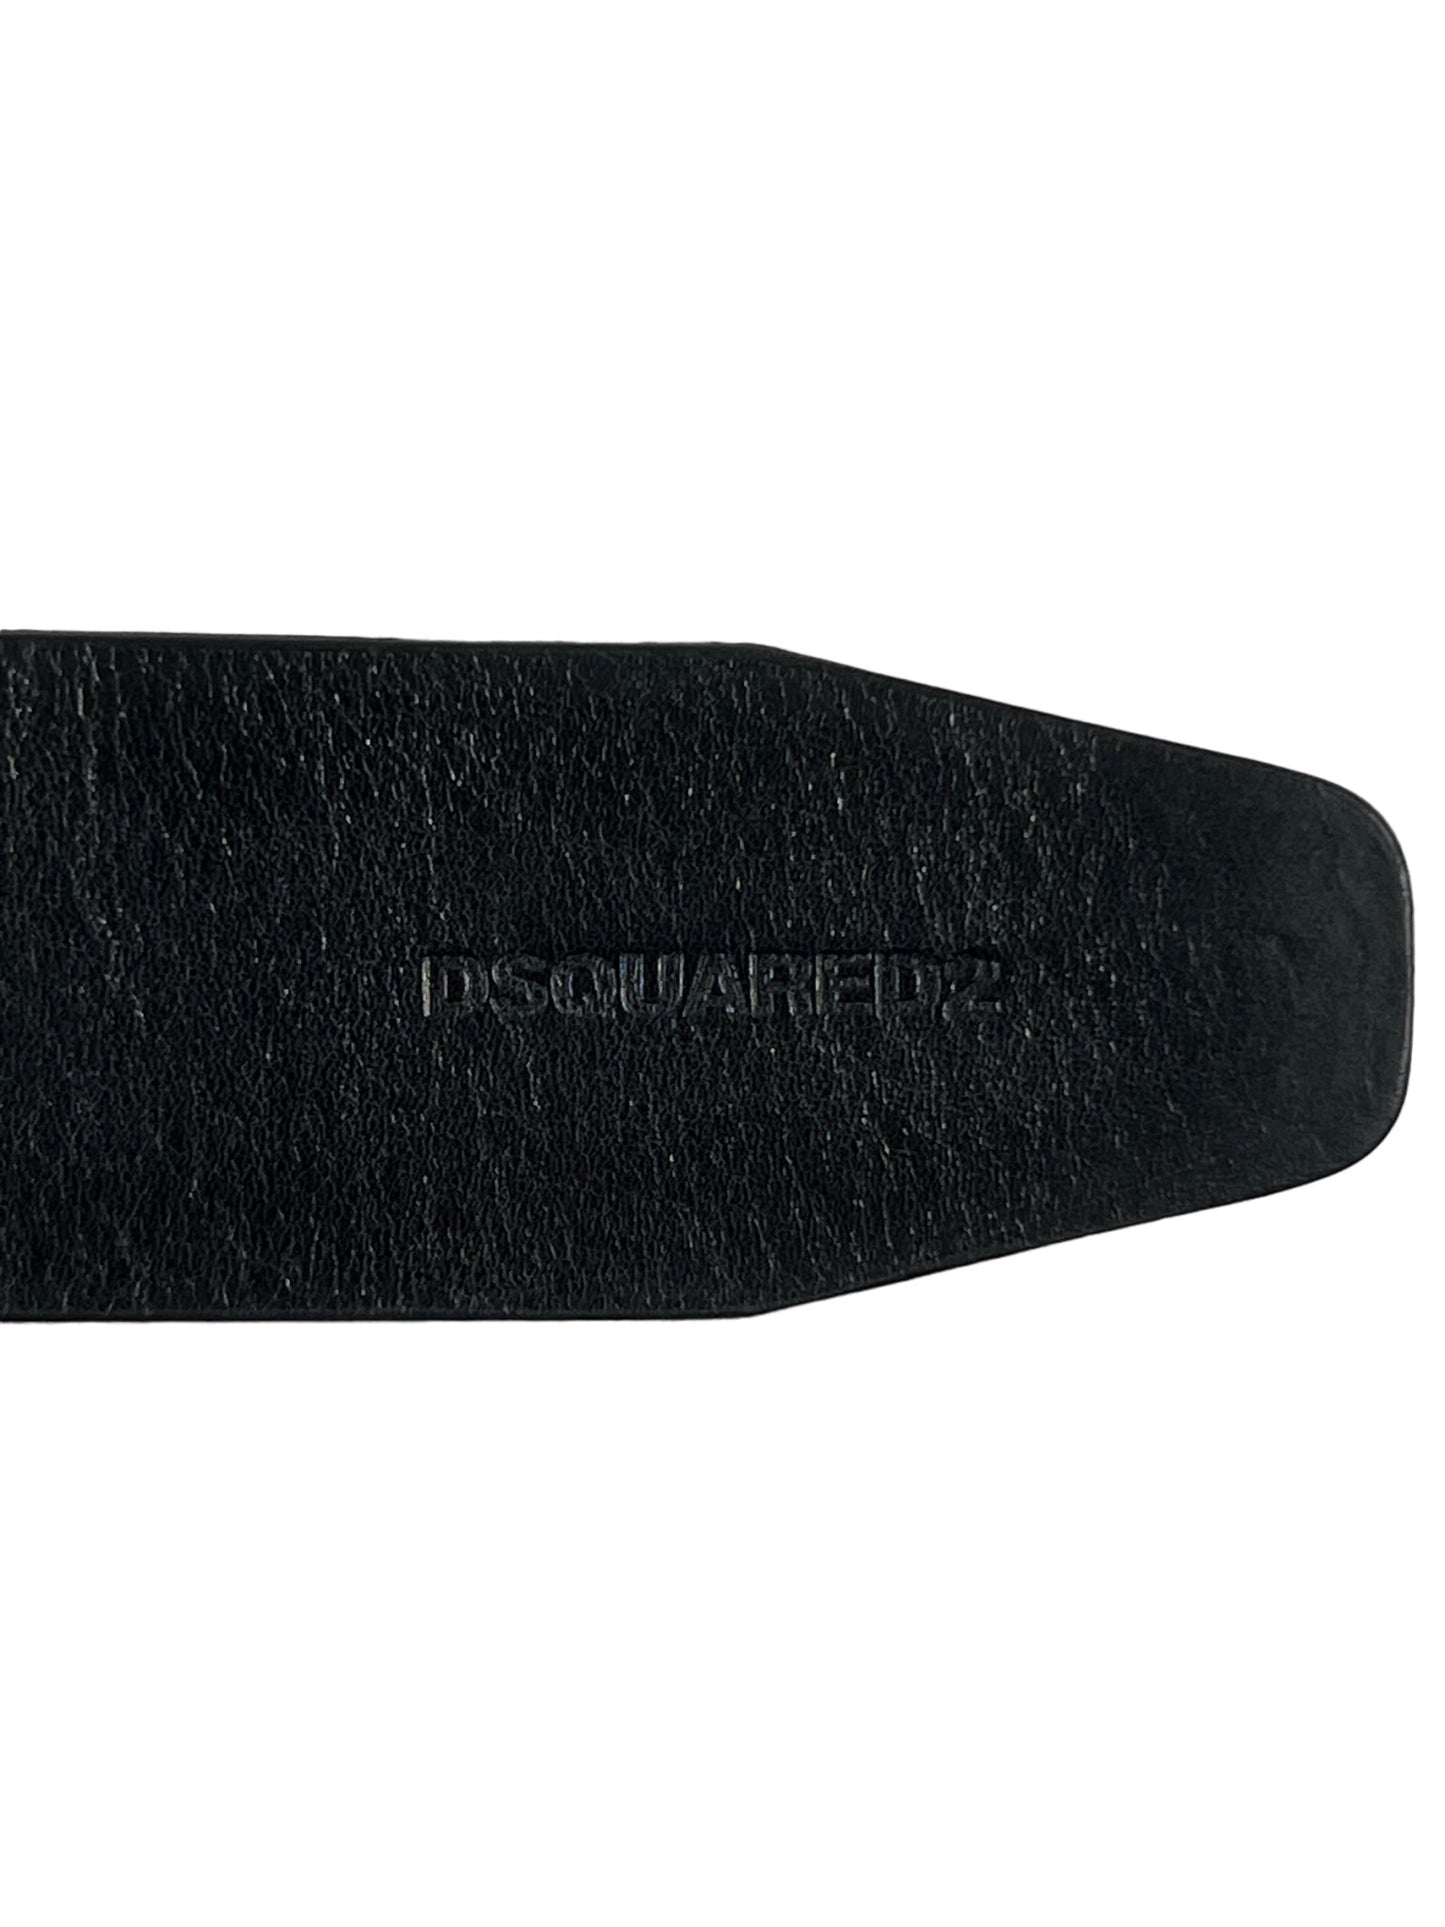 A DSQUARED2 BEM0293 BELT-VACCHETTA-NERO-PALLADIO with text on it, DSQUARED2 Made In Italy.